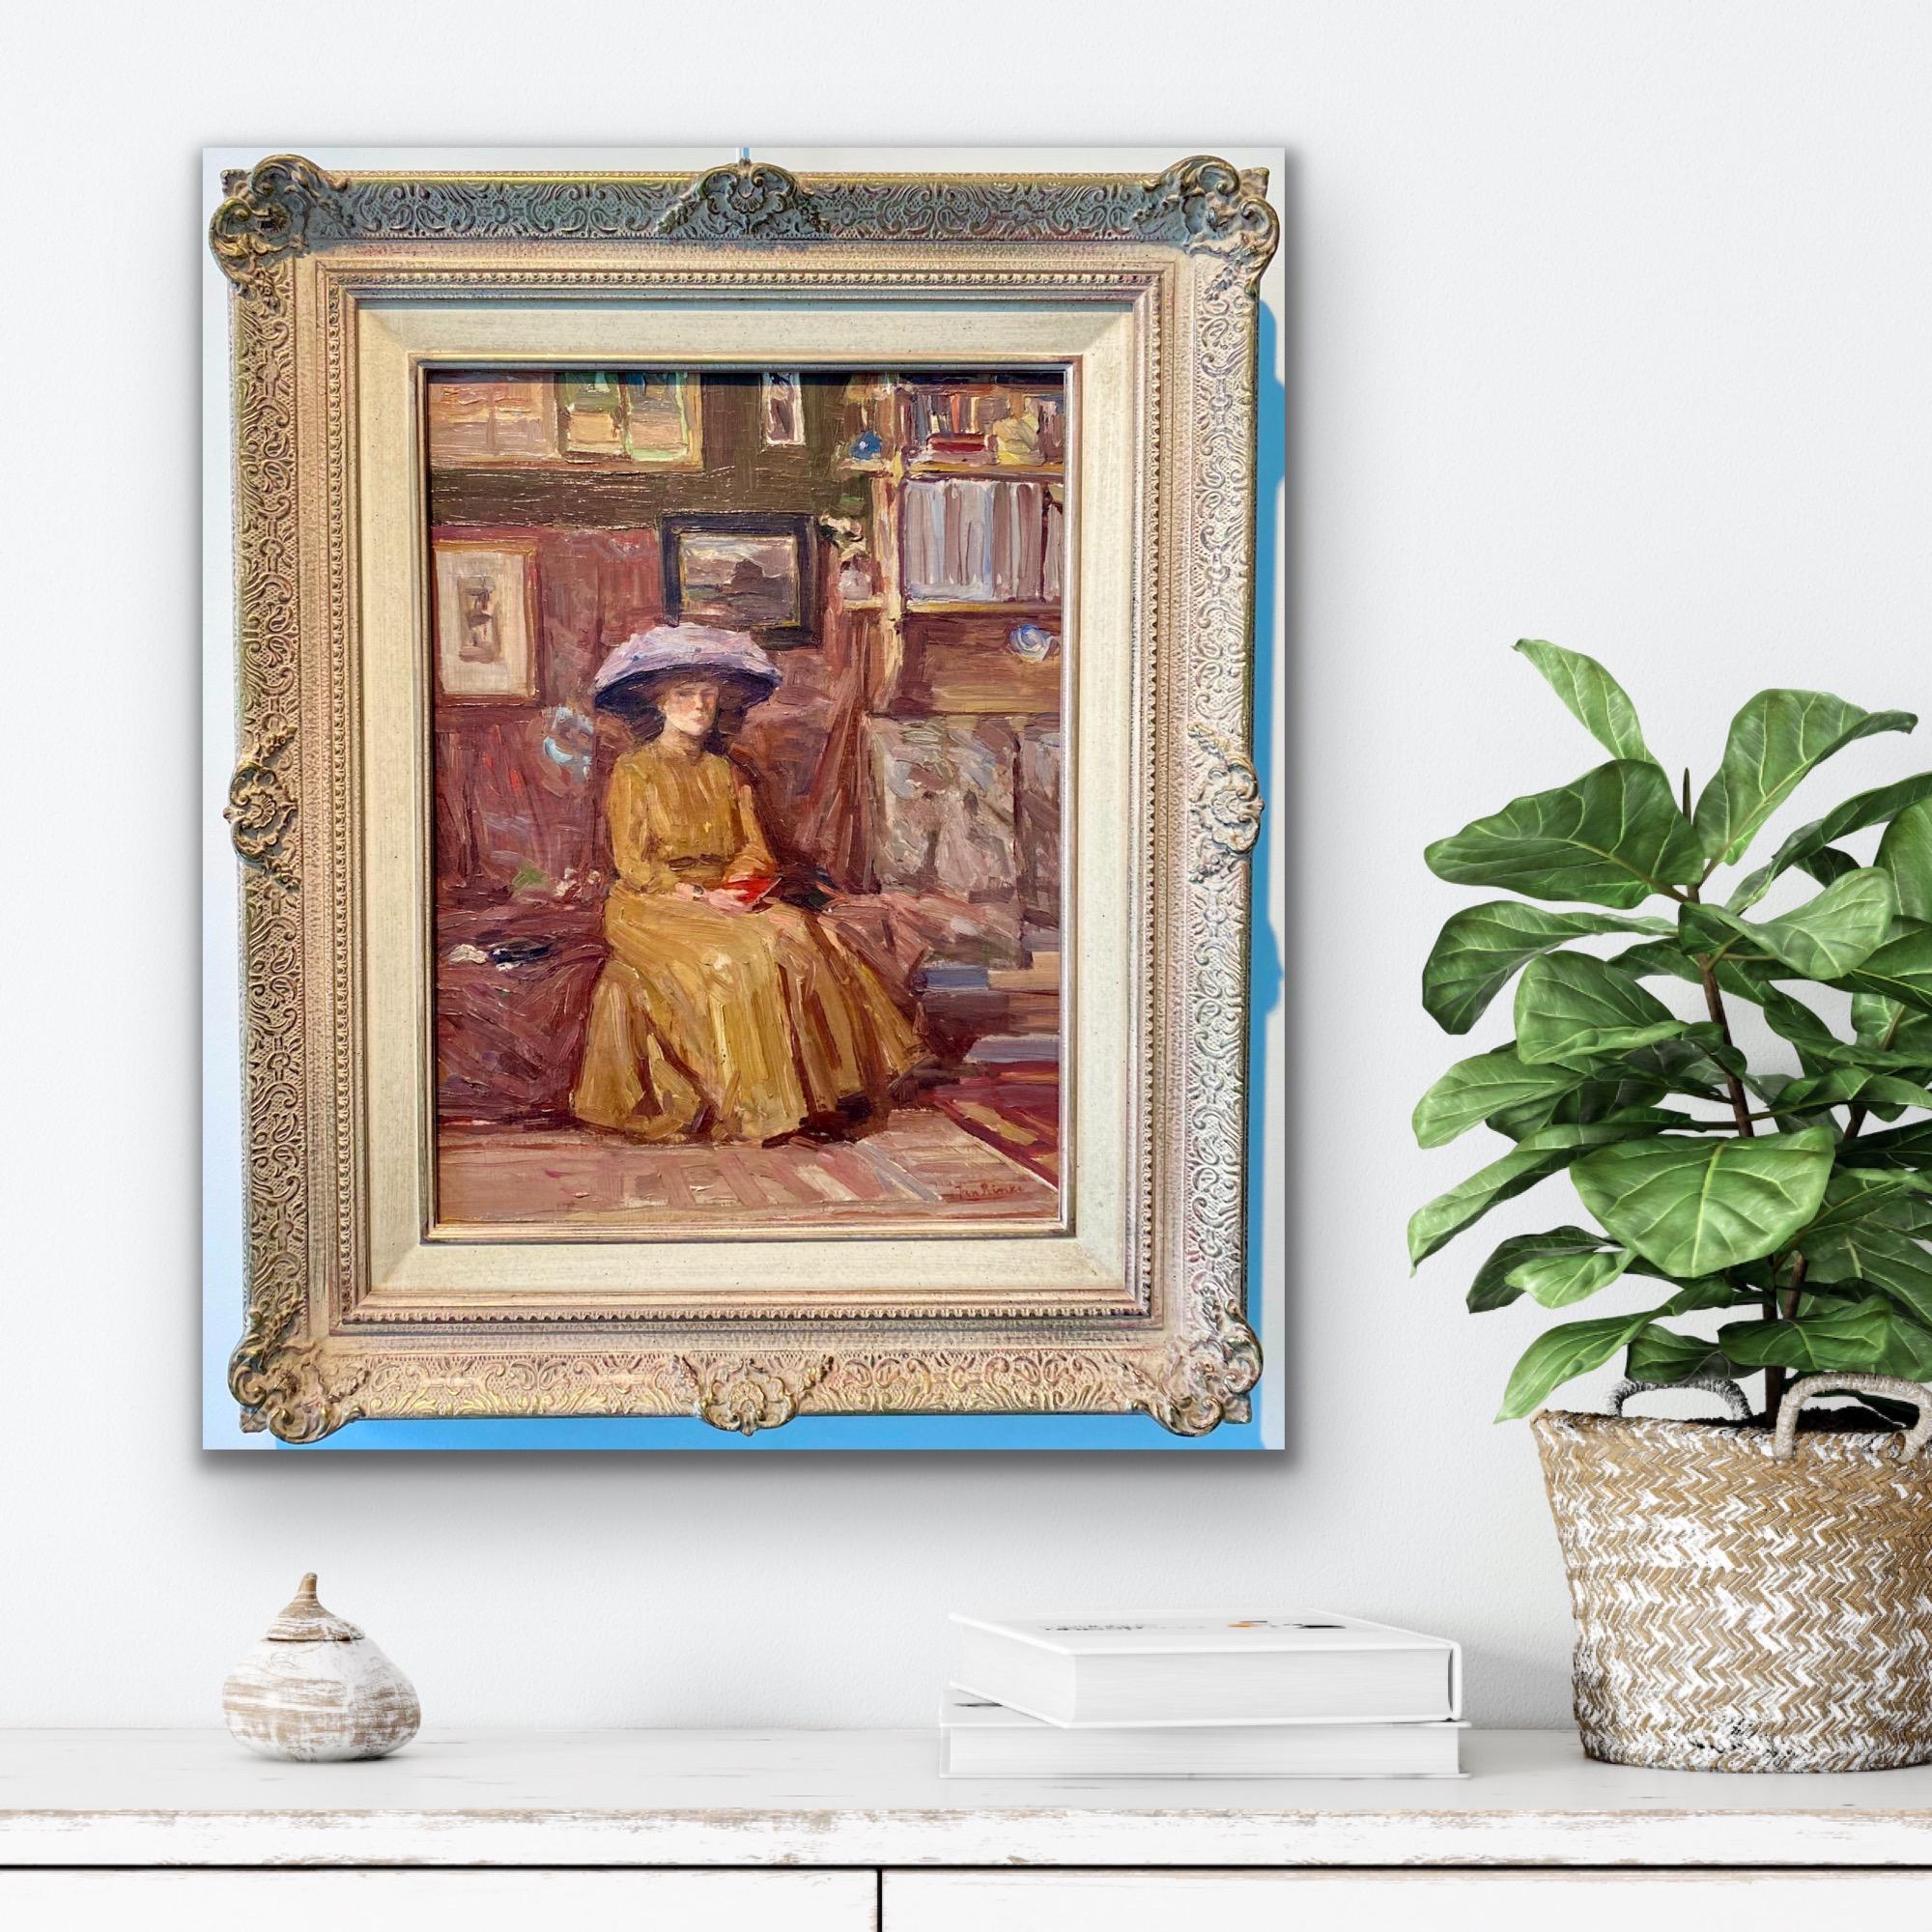 19th century belle epoque oil painting - Lady in an artist's studio - genre - Painting by Jan Rinke